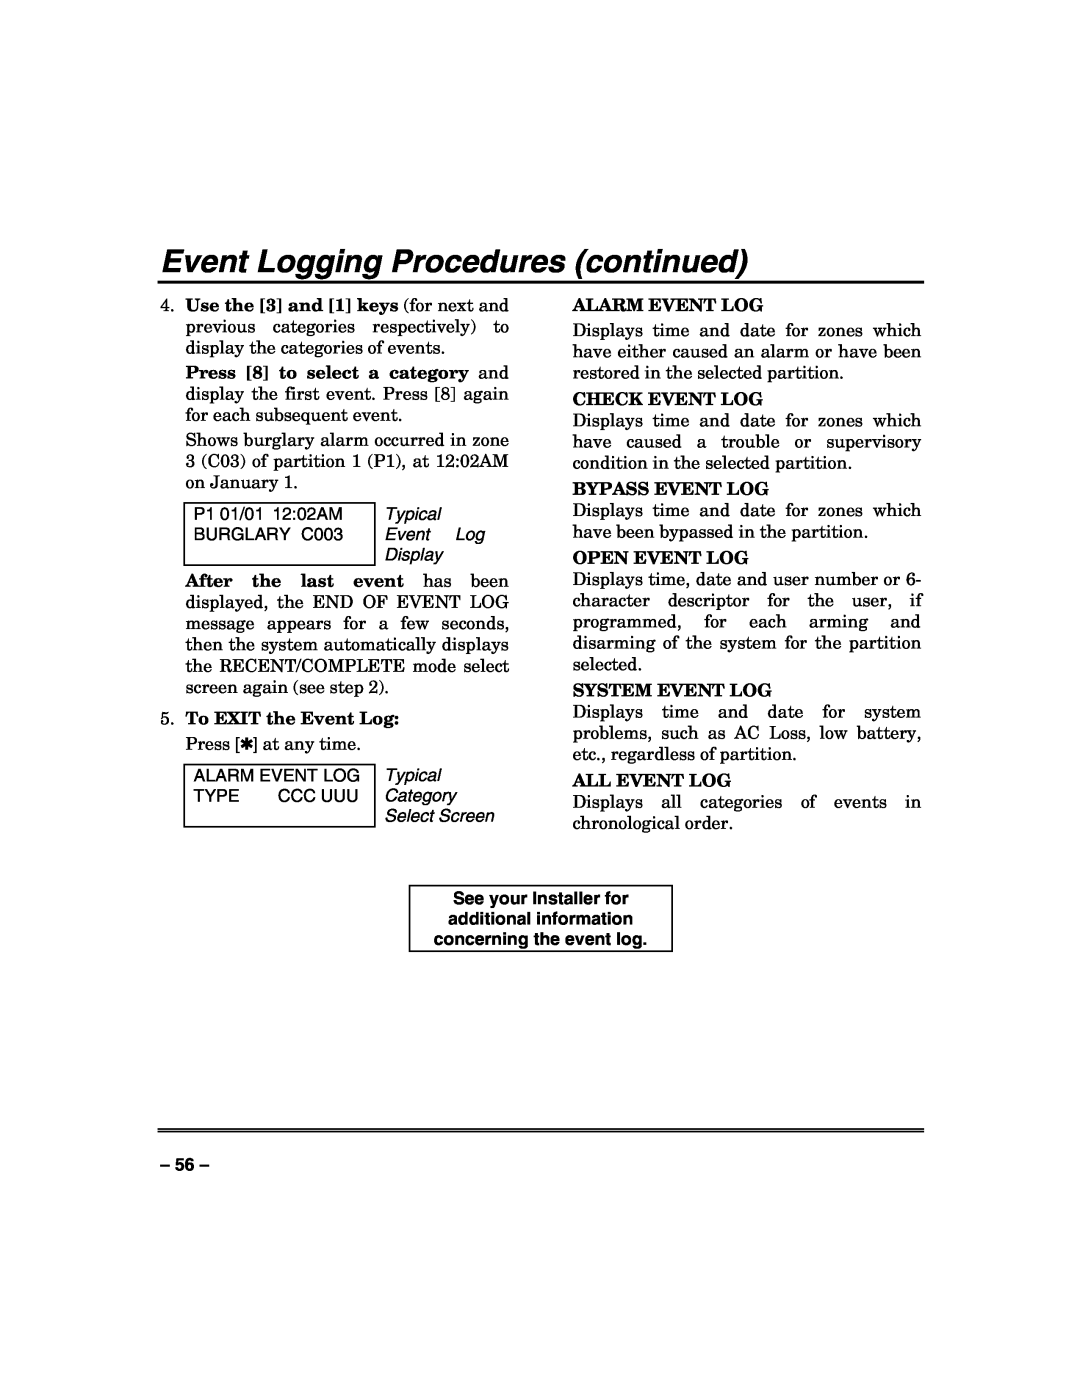 Honeywell VISTA-250FBP manual Event Logging Procedures continued, Typical, Display, To EXIT the Event Log Press at any time 